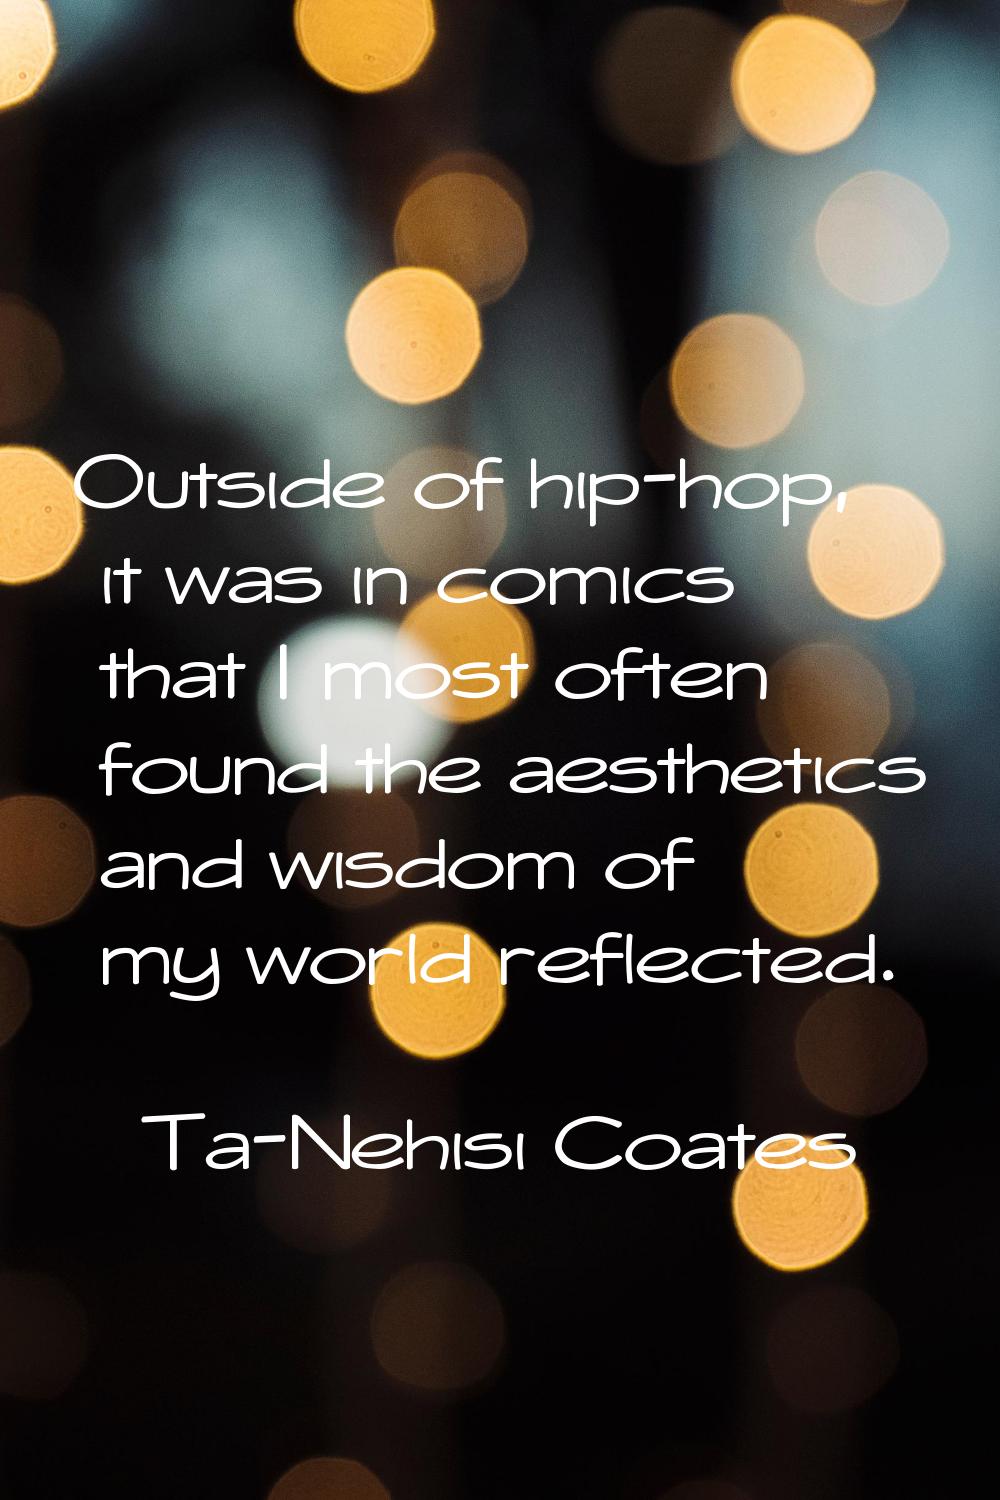 Outside of hip-hop, it was in comics that I most often found the aesthetics and wisdom of my world 